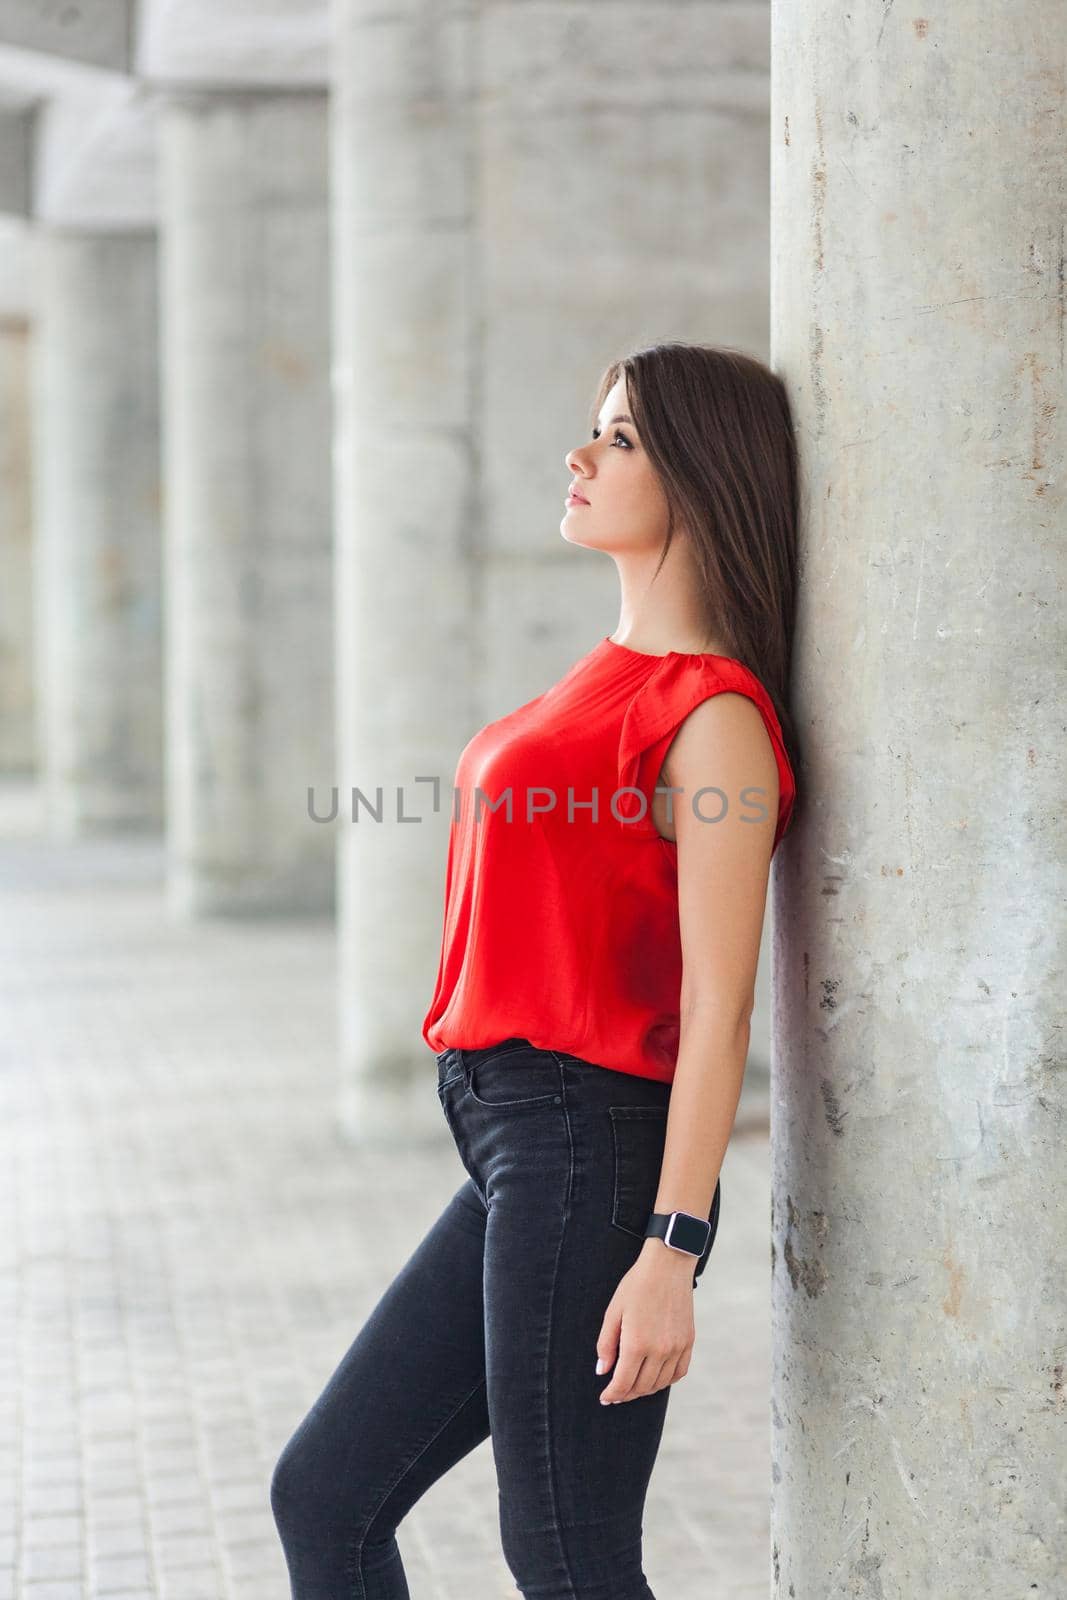 beautiful woman in red blouse and jeans posing while leaning on gray column. outdoor shot.